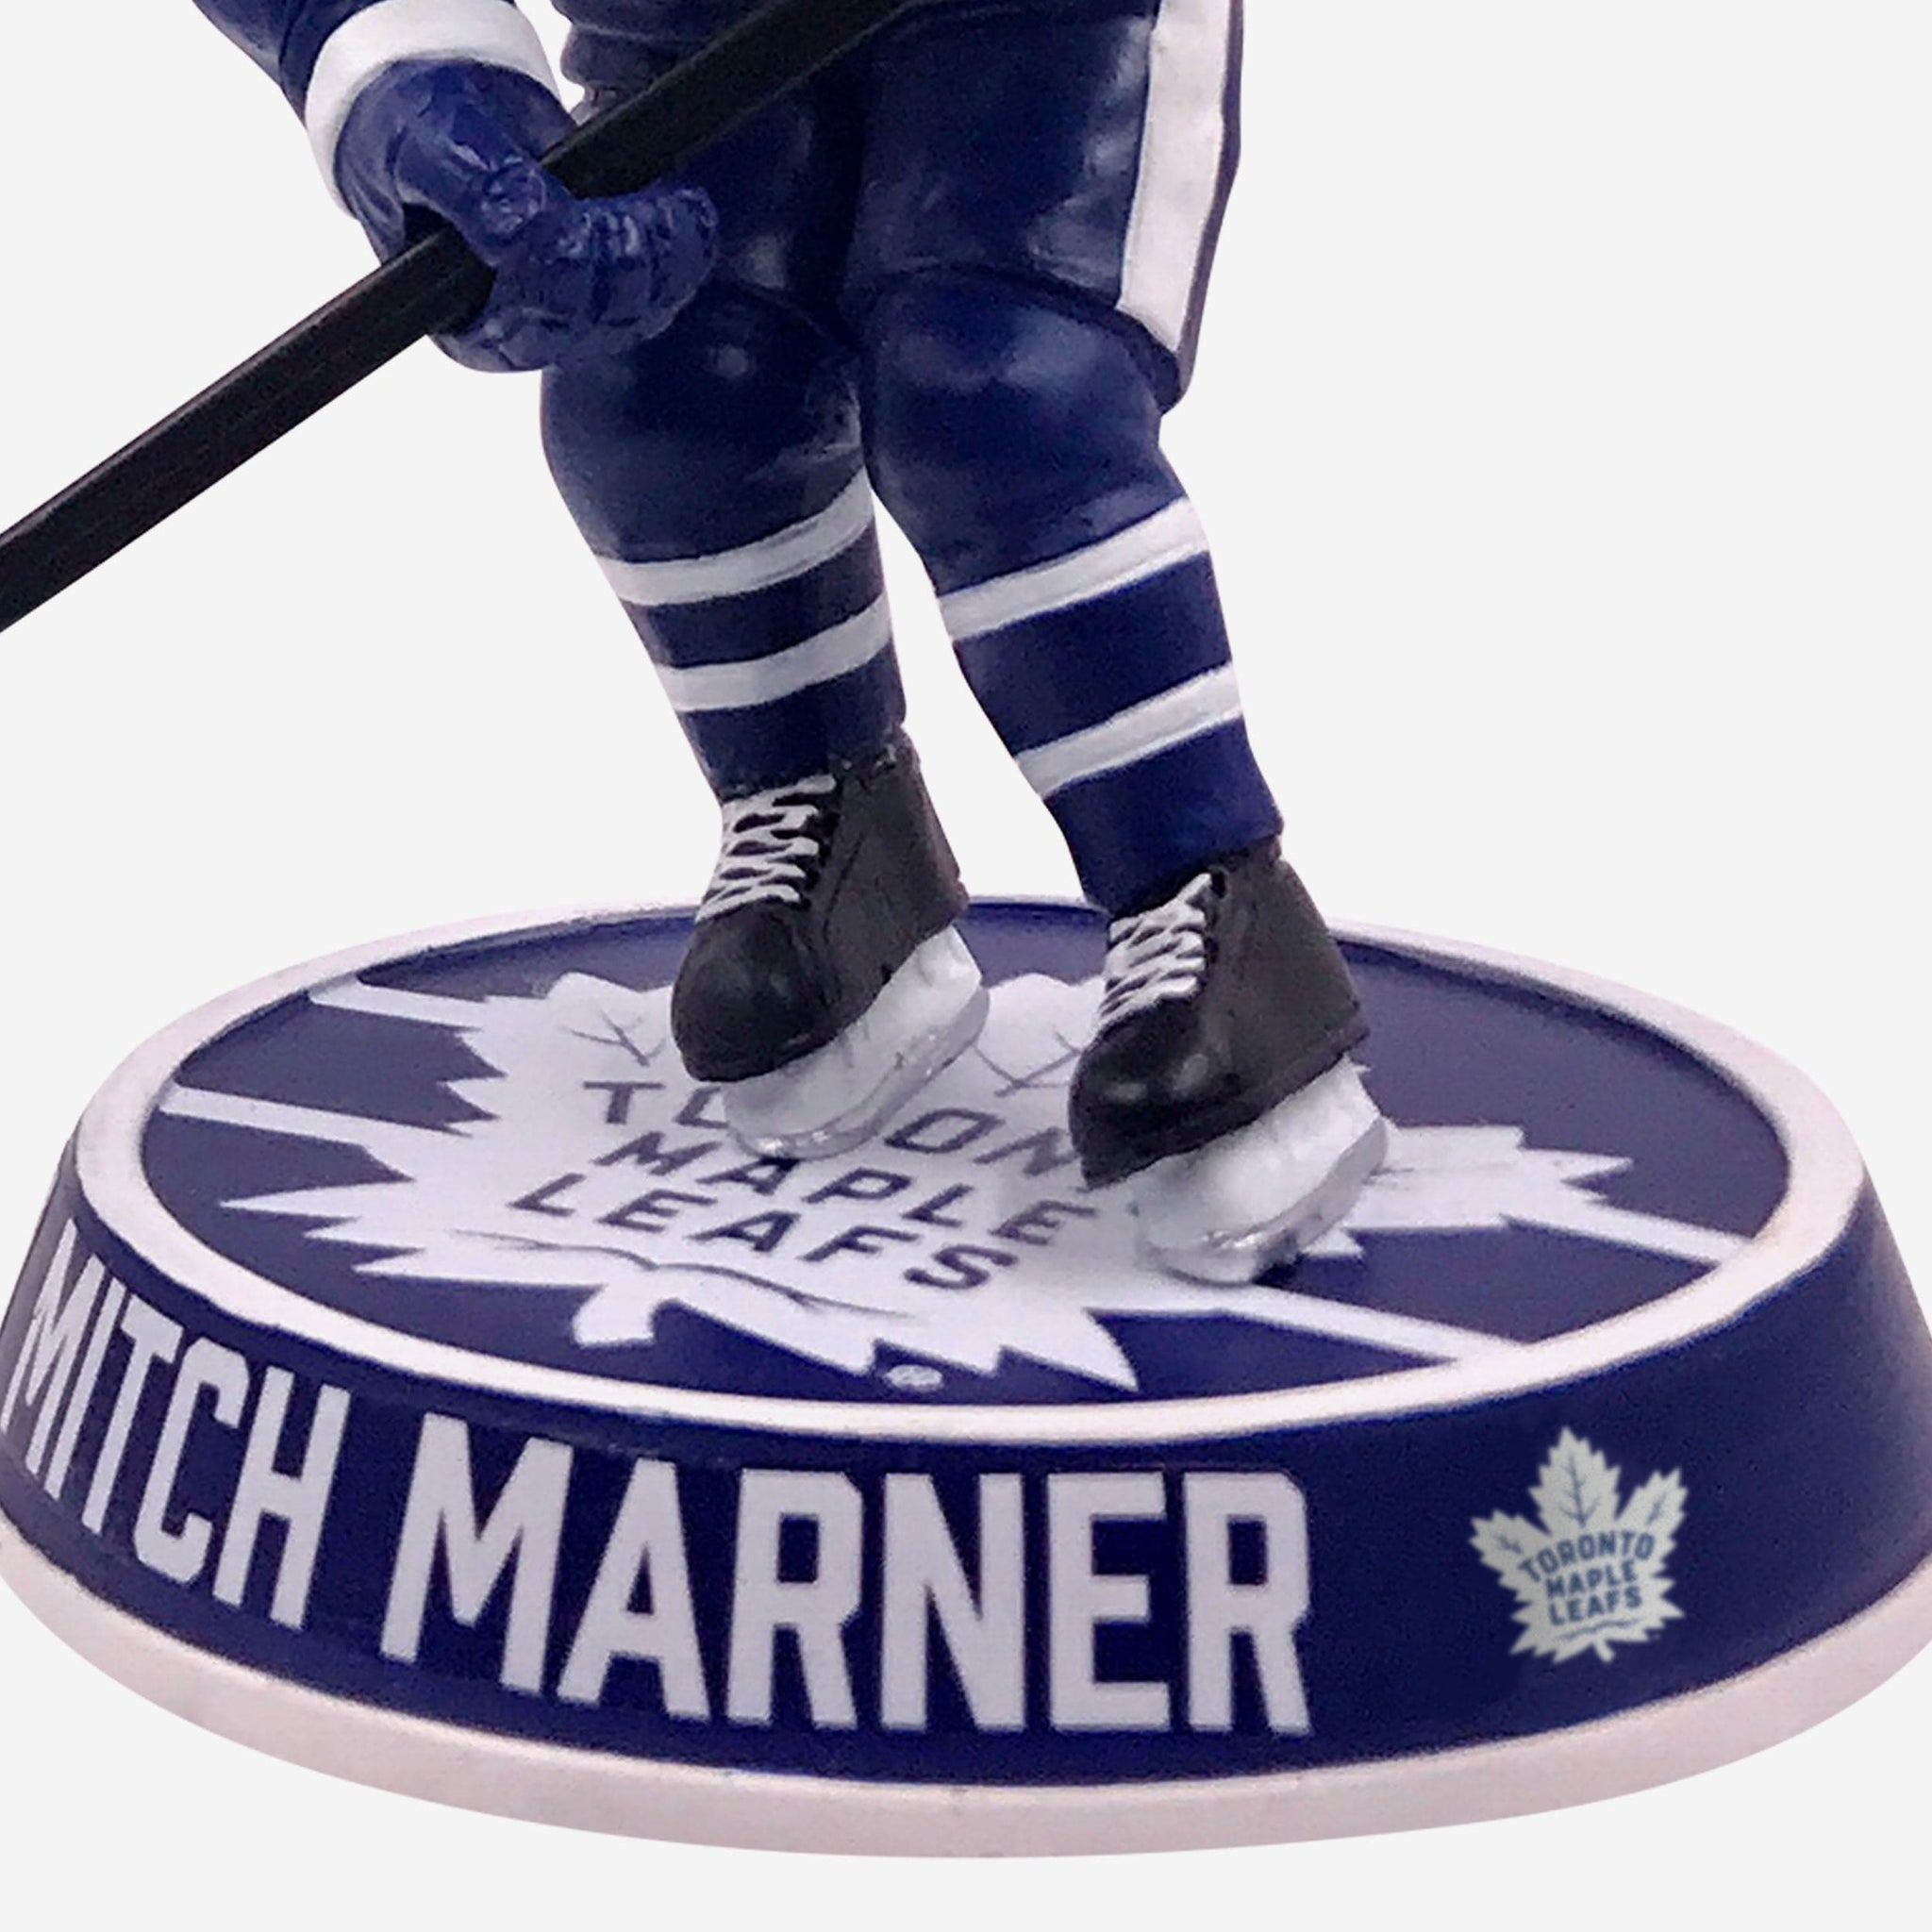 Mitch Marner Clothing for Sale